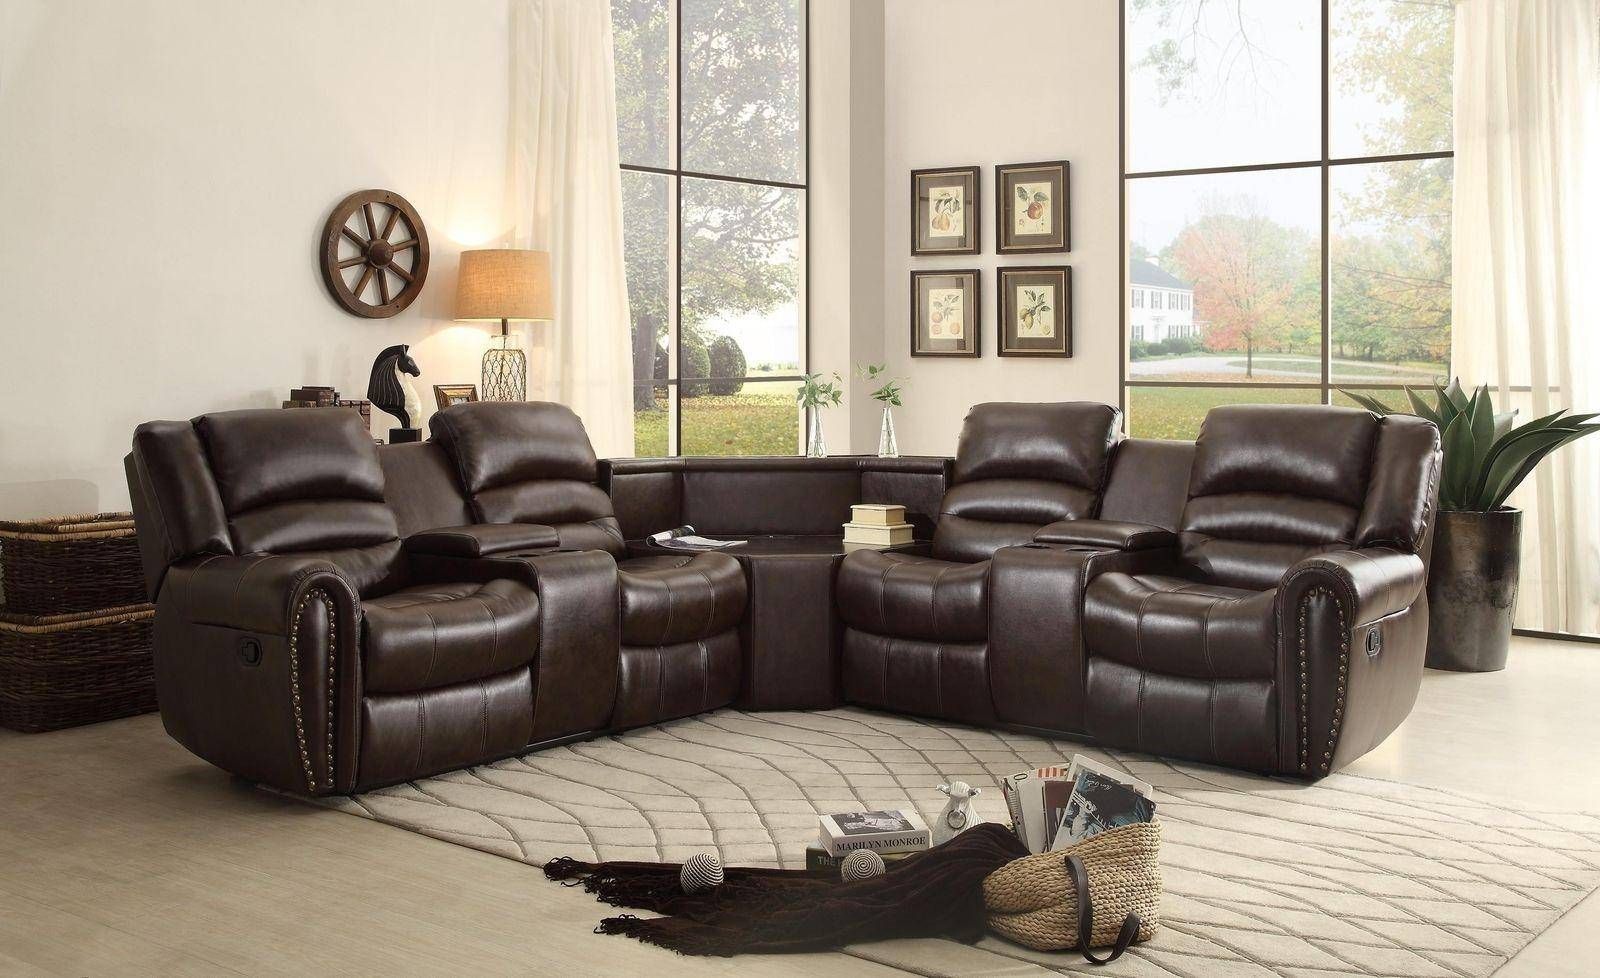 Homelegance Palmyra Brown Bonded Leather Reclining Throughout 3pc Bonded Leather Upholstered Wooden Sectional Sofas Brown (View 6 of 15)